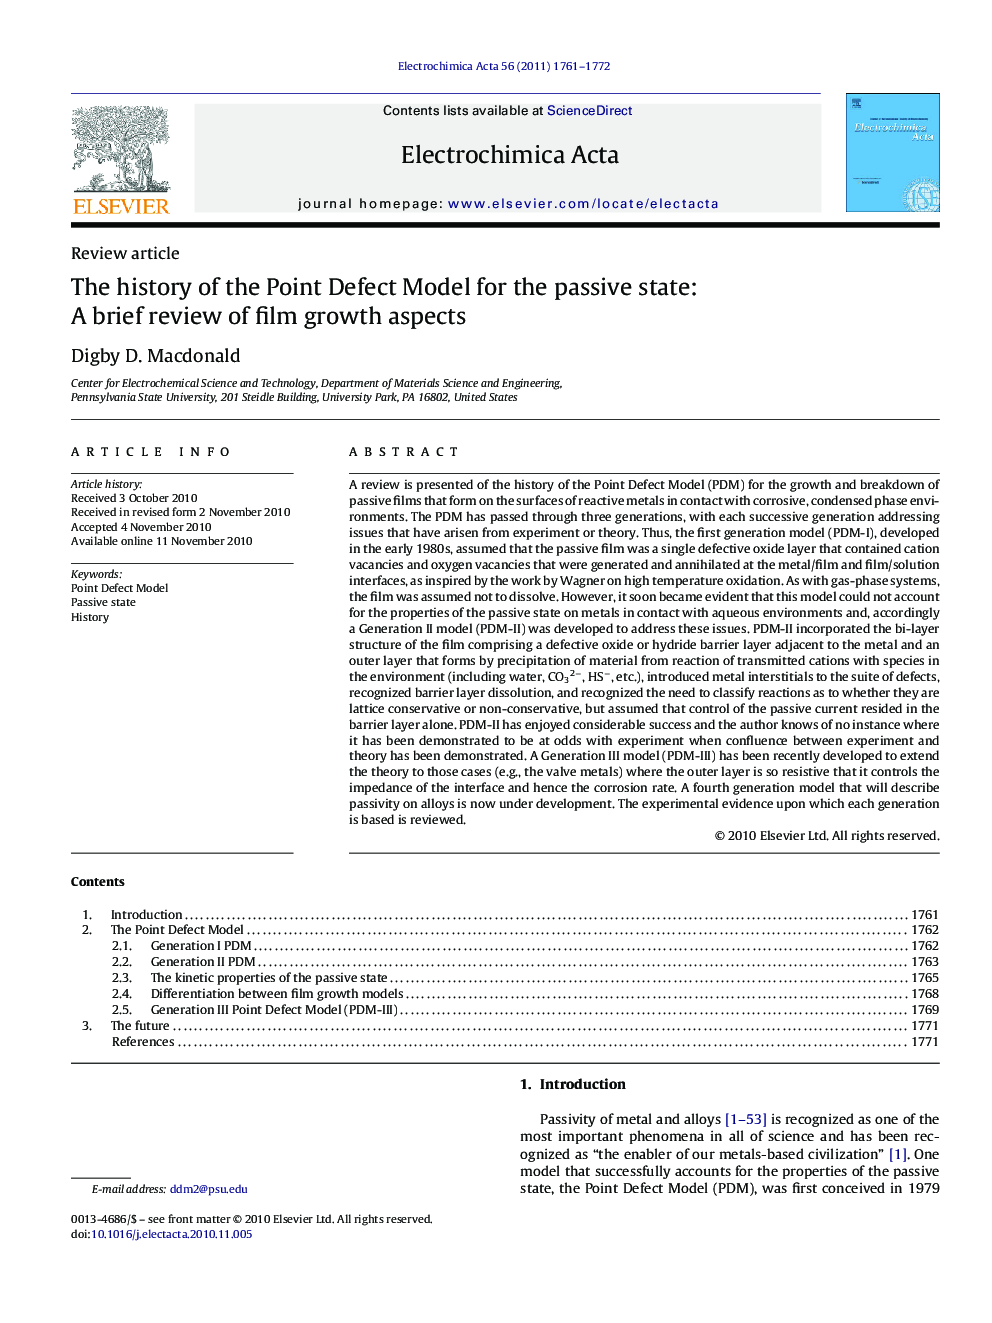 The history of the Point Defect Model for the passive state: A brief review of film growth aspects